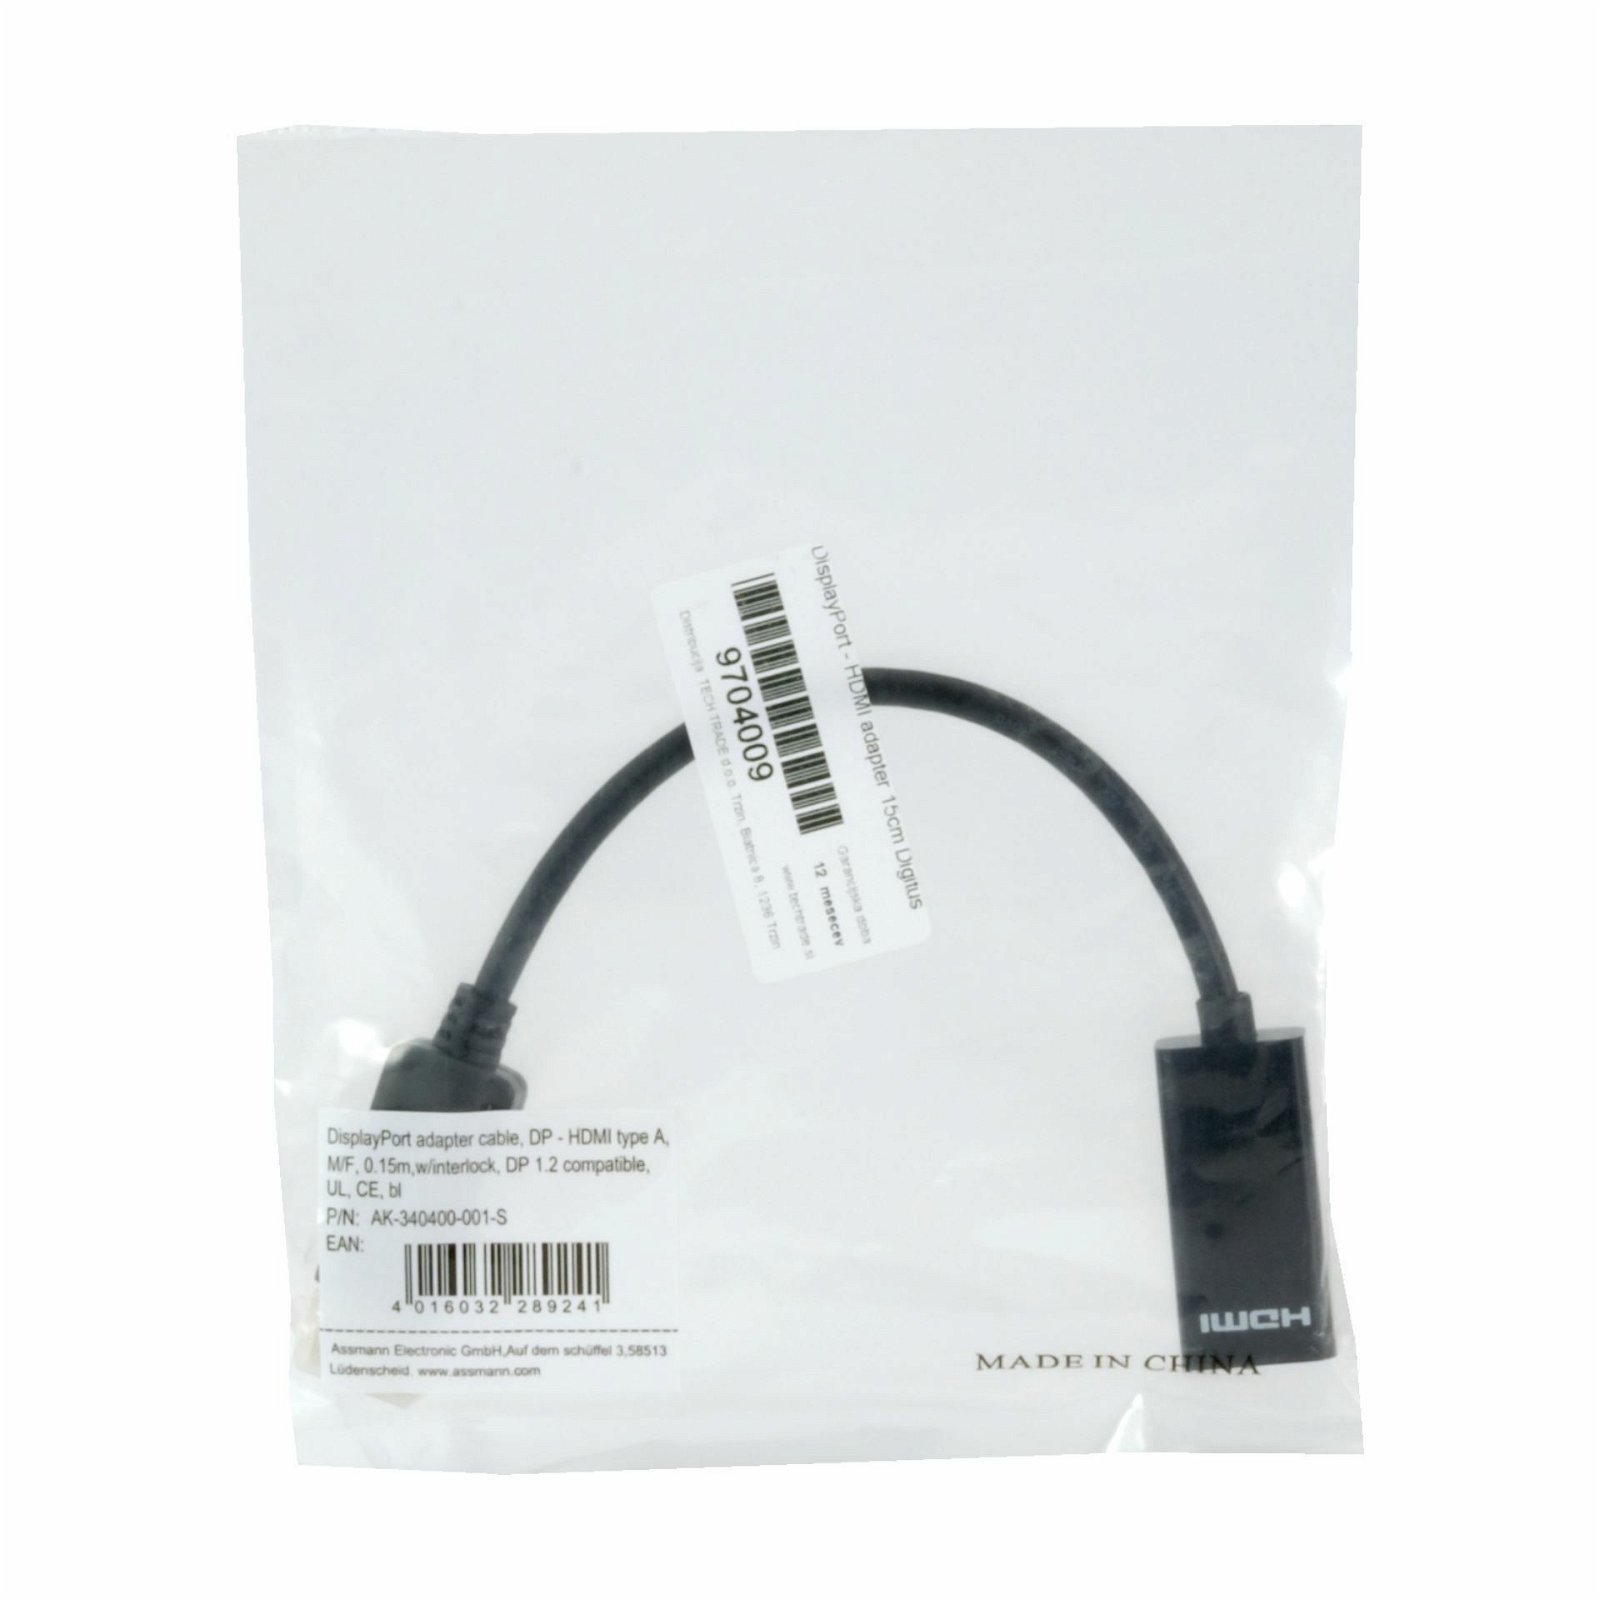 Digitus Display Port to HDMI Type-A Adapter Cable, 0.15m